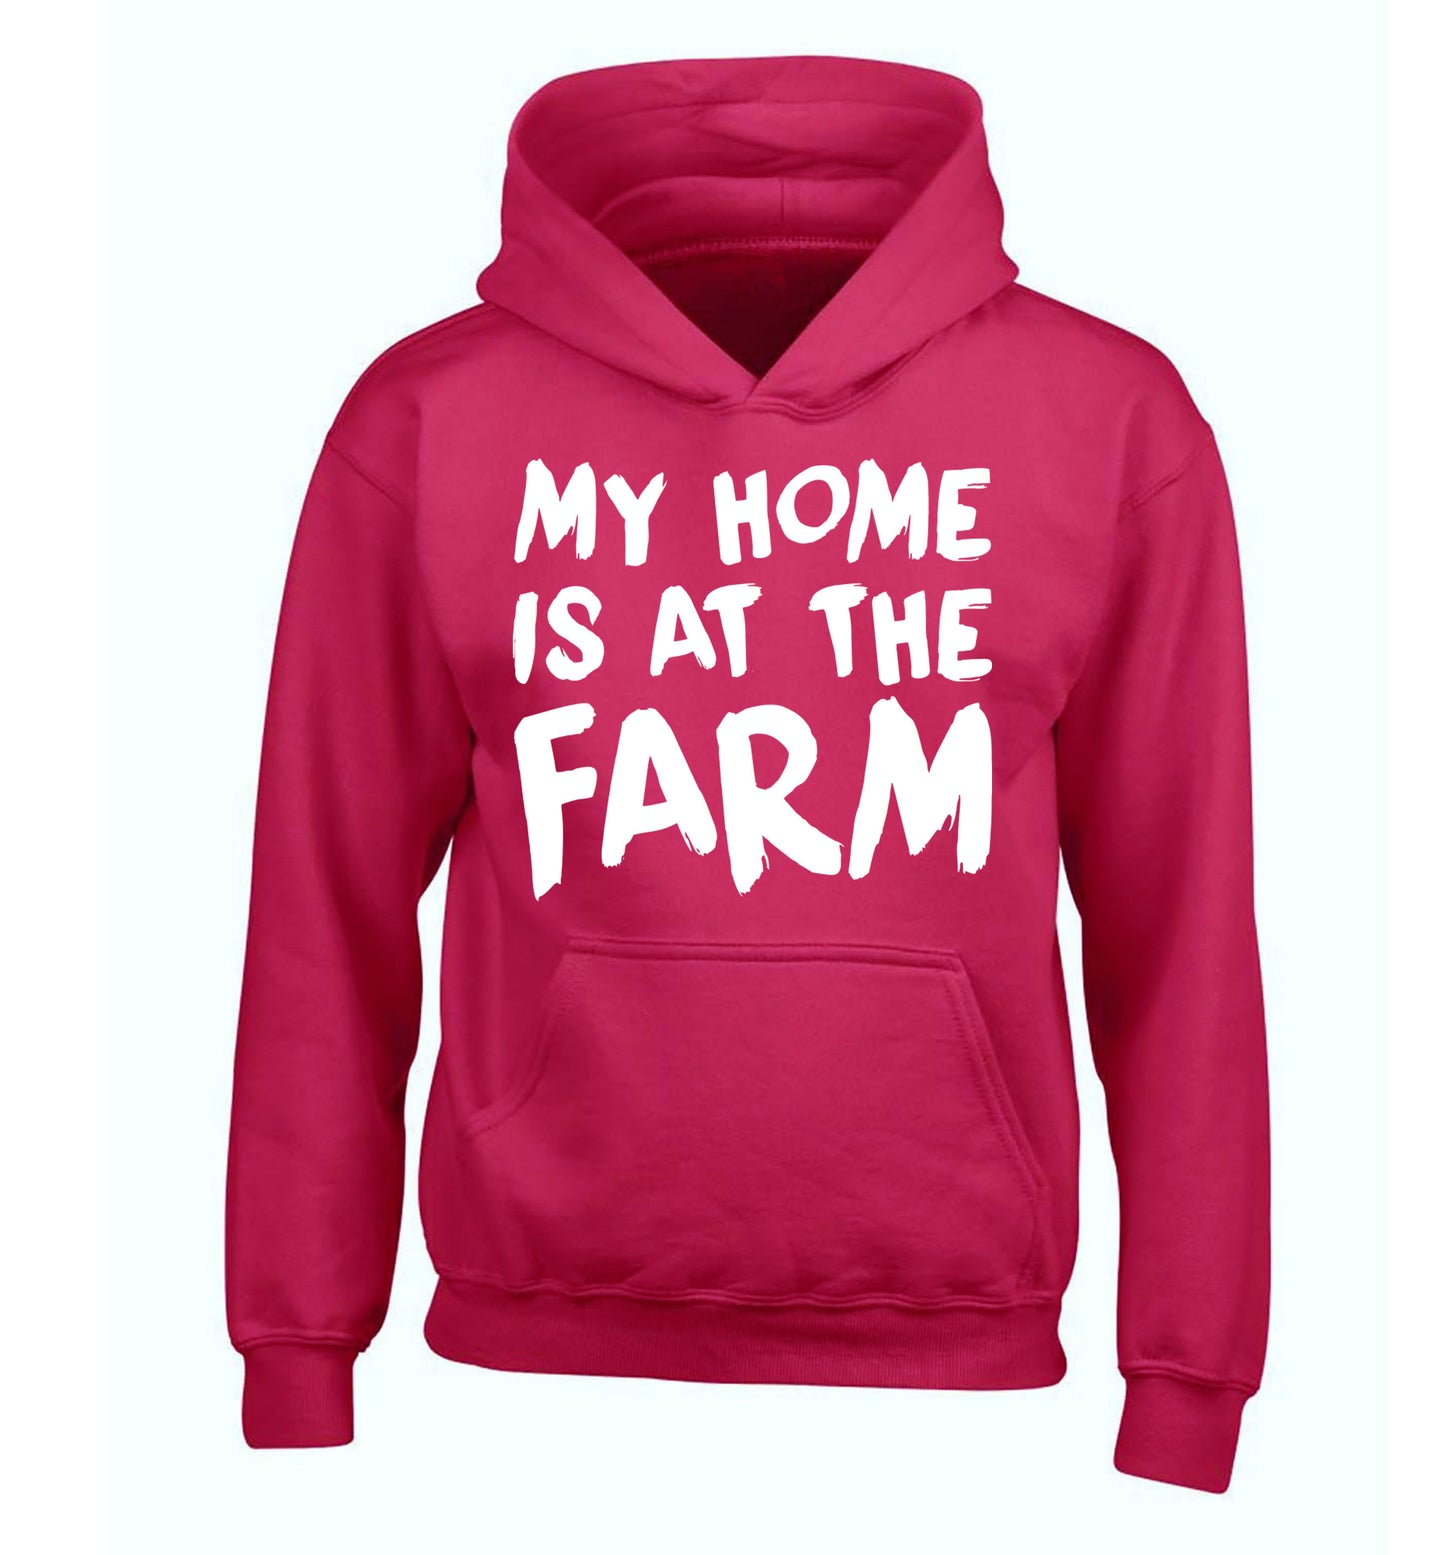 My home is at the farm children's pink hoodie 12-14 Years